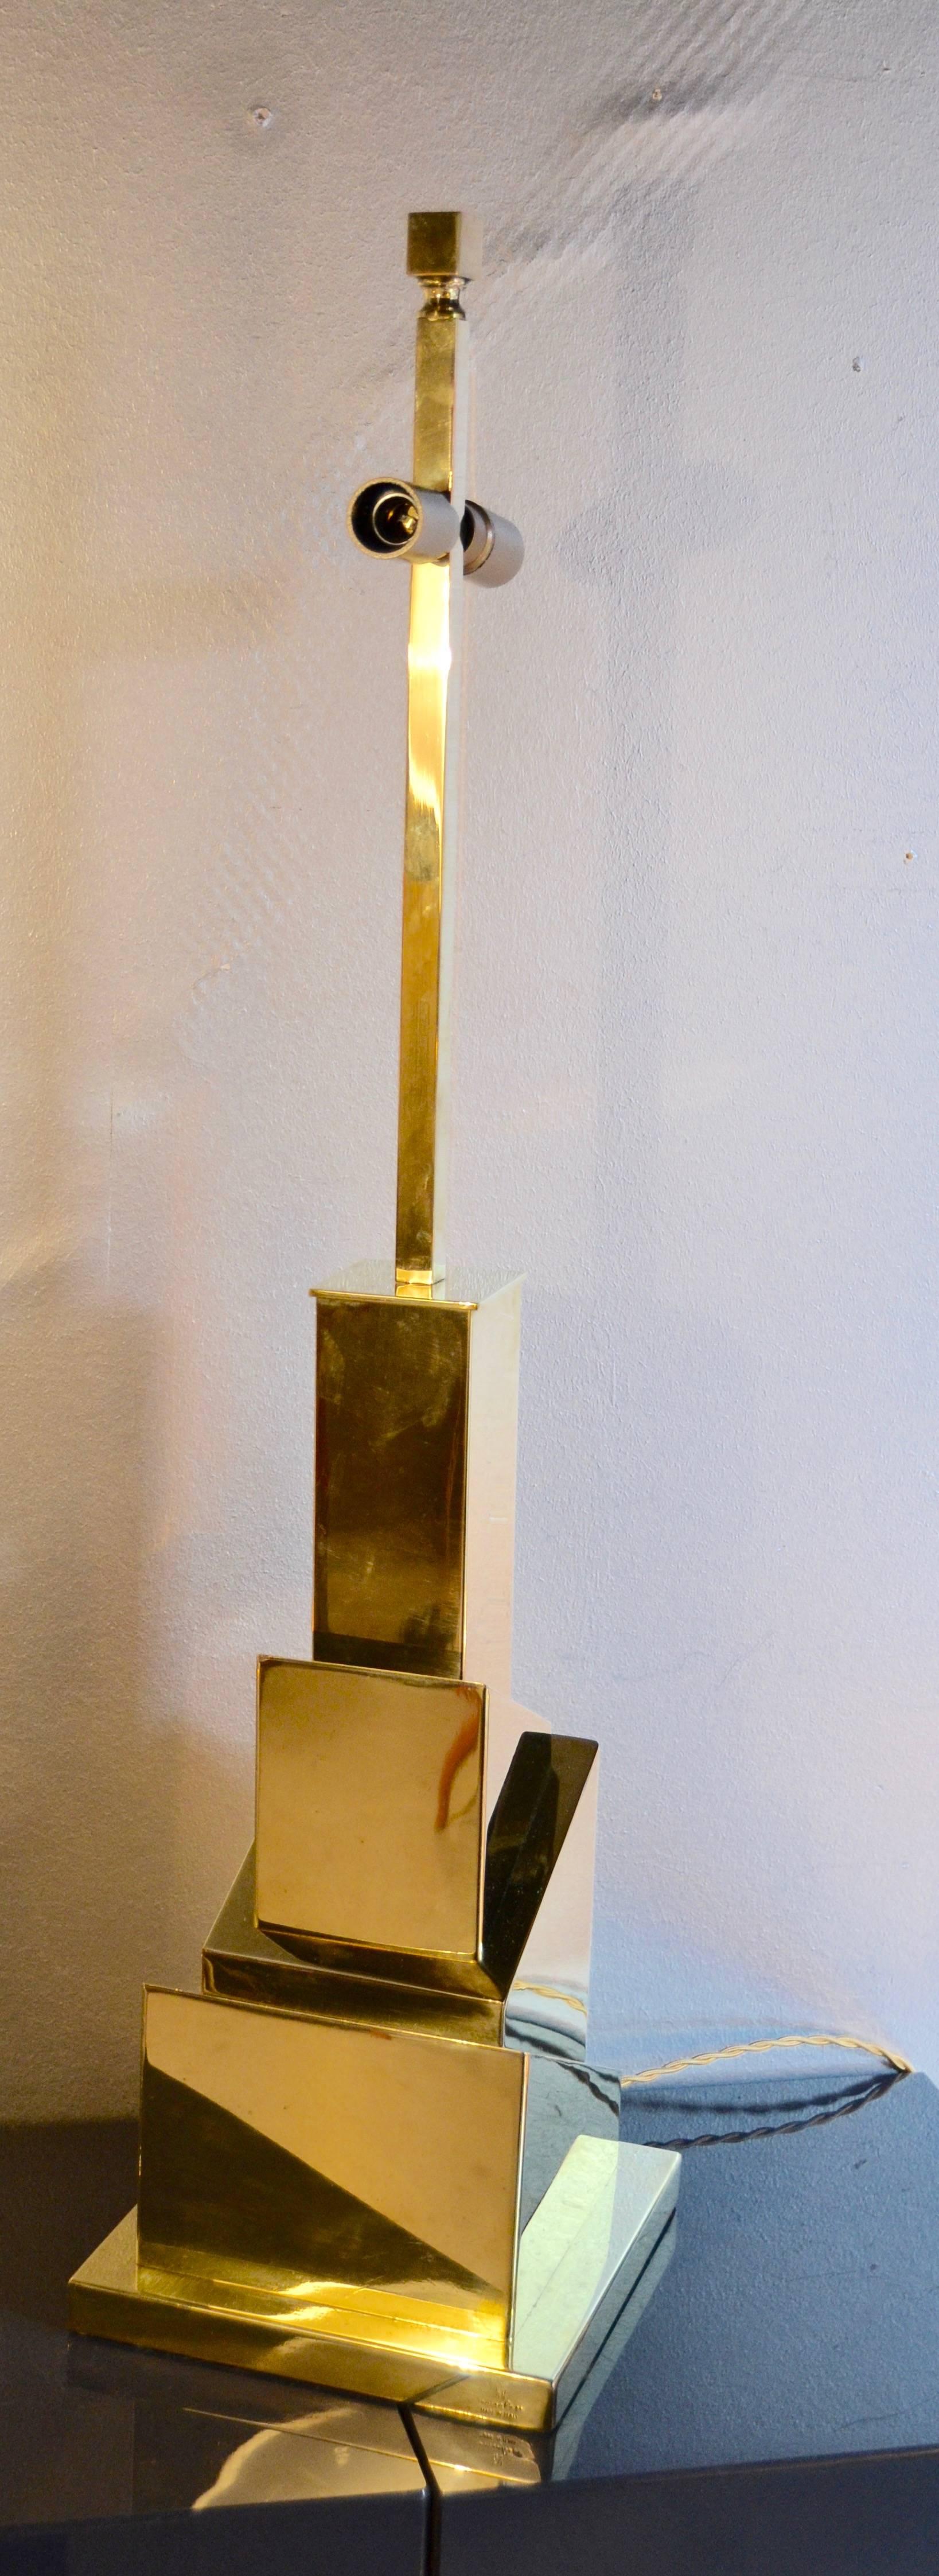 1970s table lamp in brass signed by Romeo Rega.
Great lamp in good vintage condition.
Rewired.